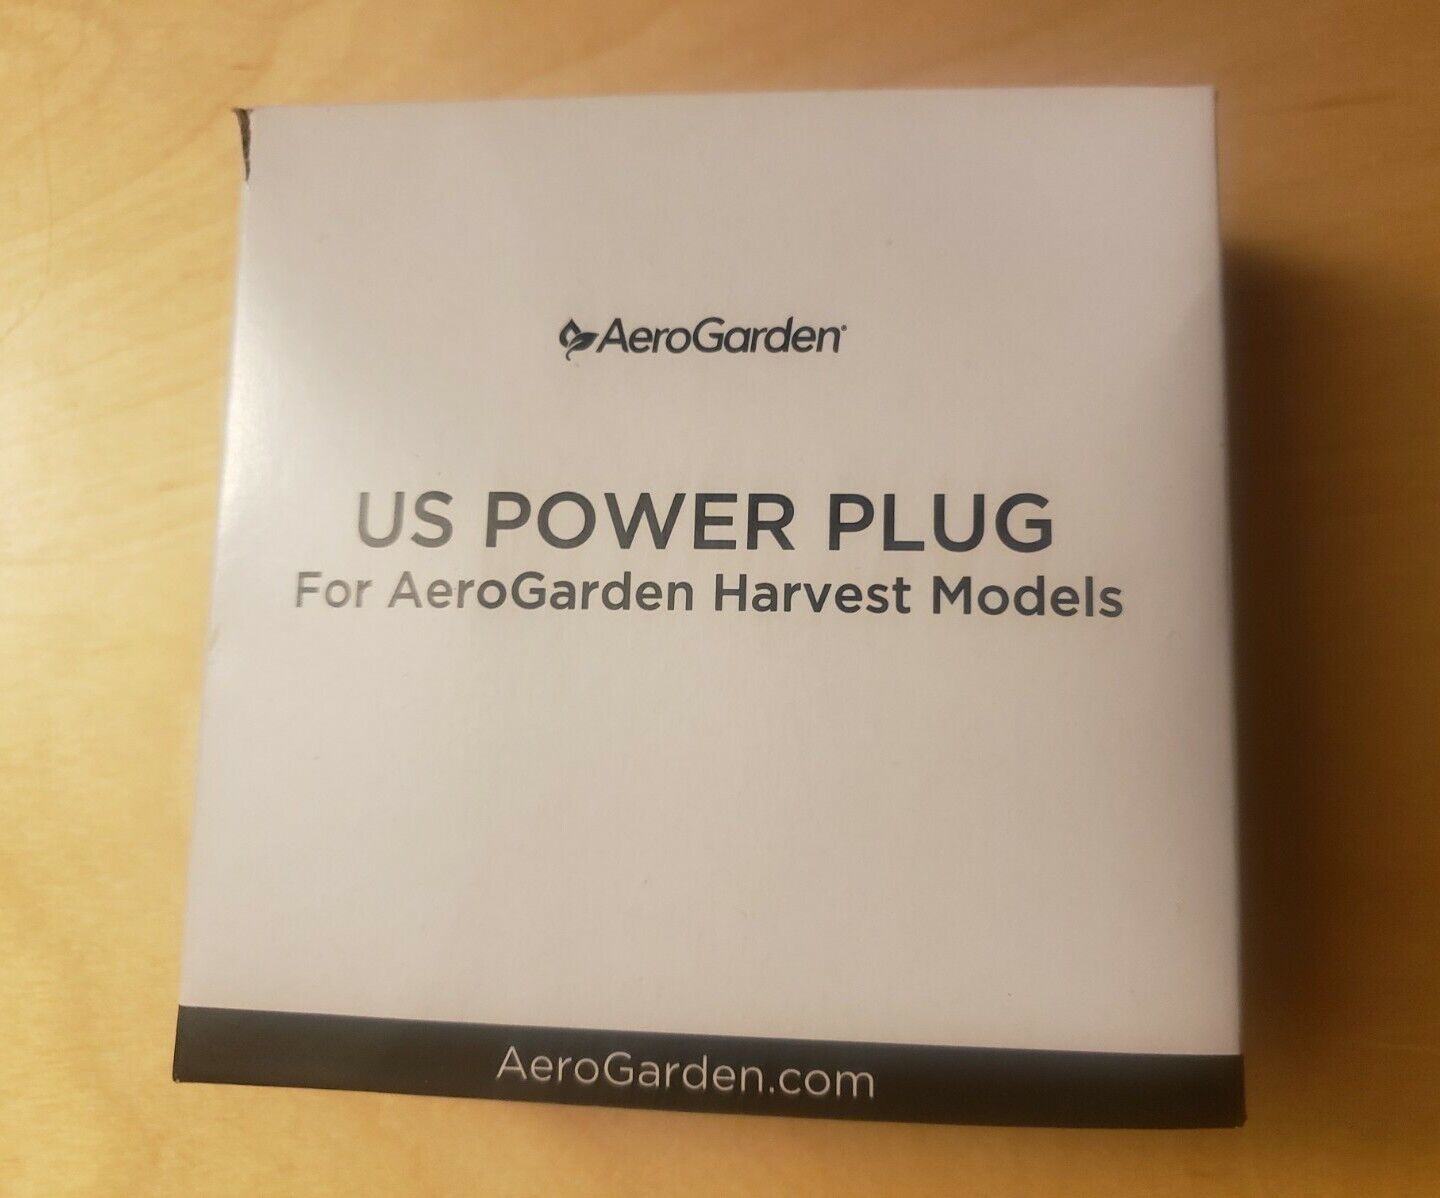 NEW AeroGarden POWER SUPPLY PLUG CORD for Harvest Model - replacement part